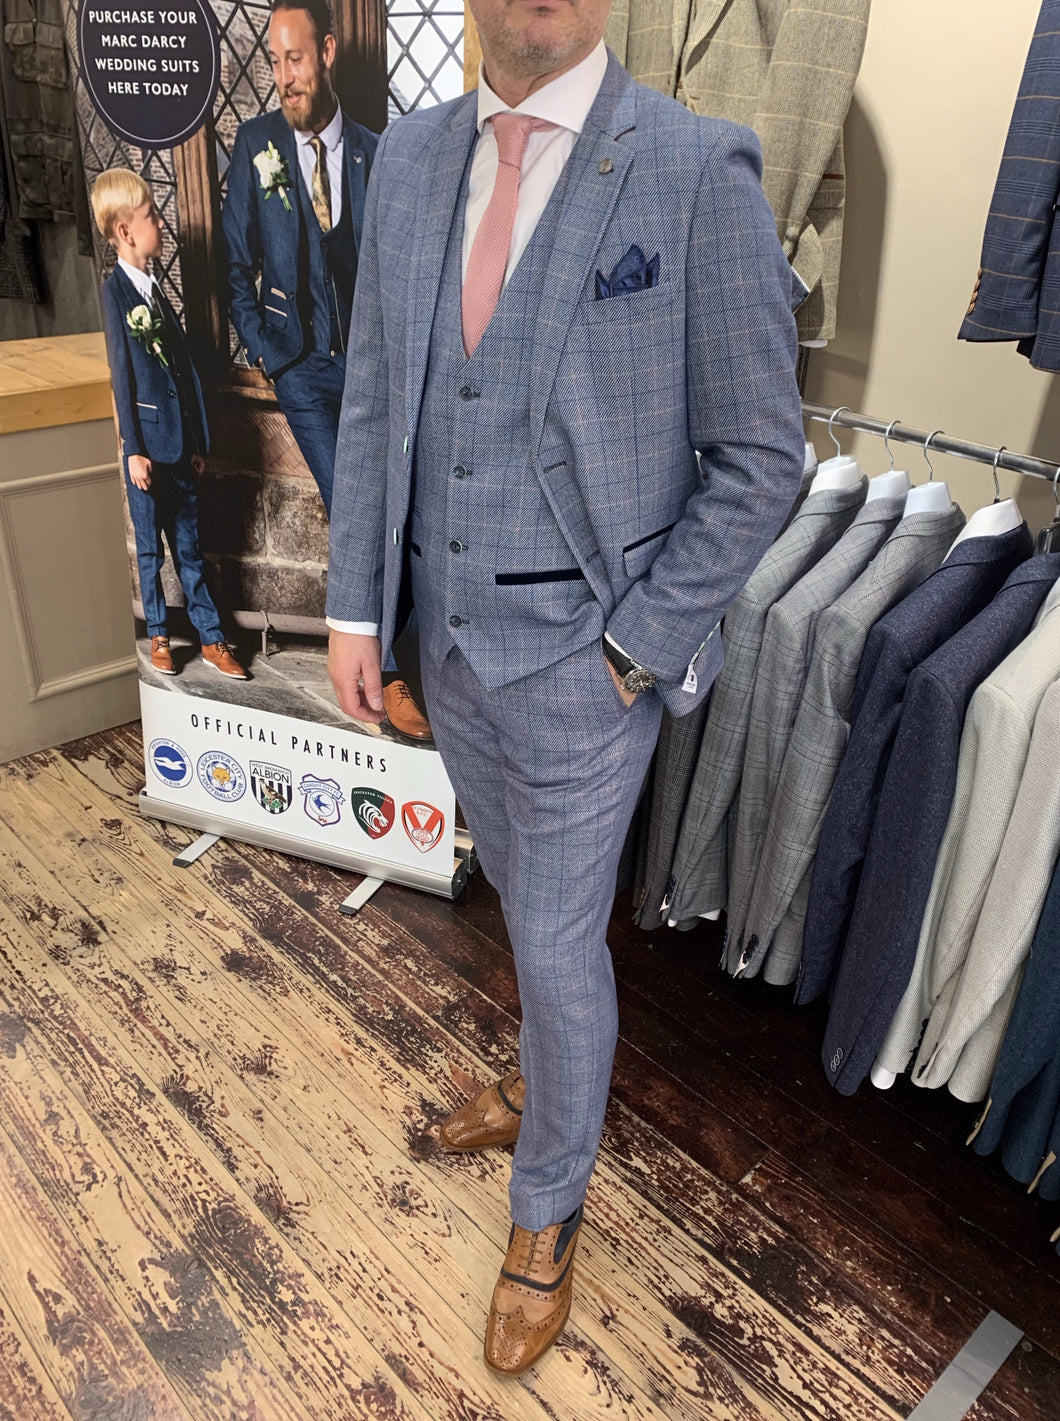 Marc Darcy ‘Harry’ blue three piece suit (waistcoat, jacket and trousers sold separately) from Gere Menswear